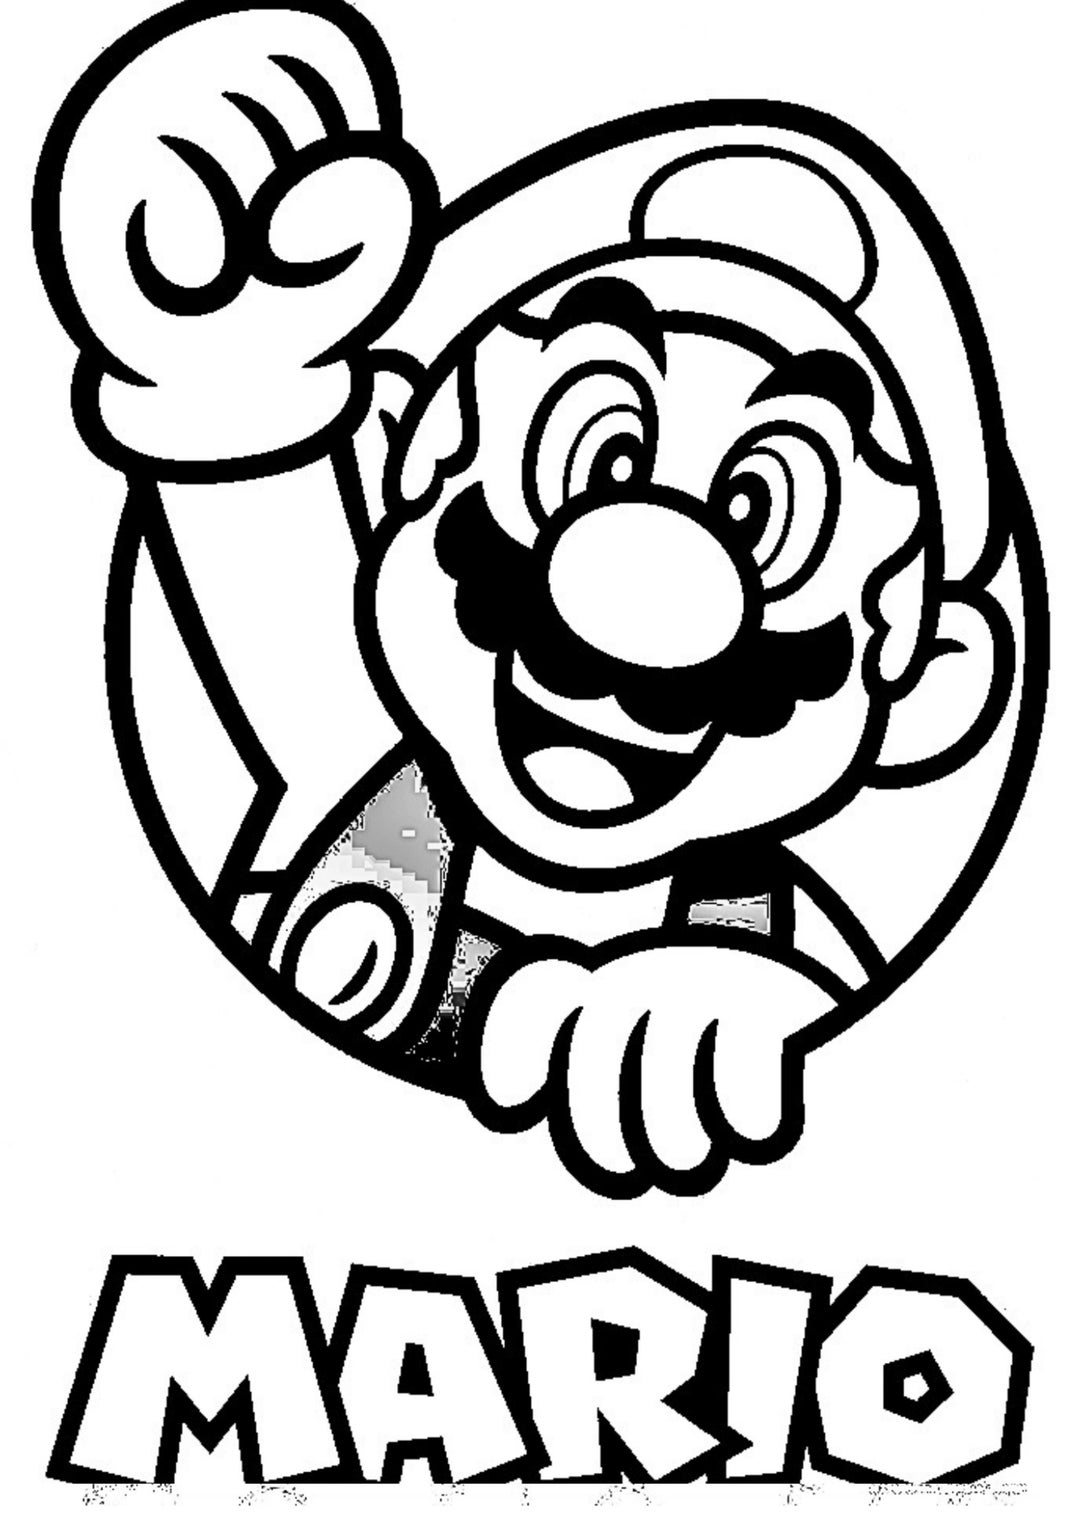 Six Mario Bros. Inspired Coloring Pages - Etsy